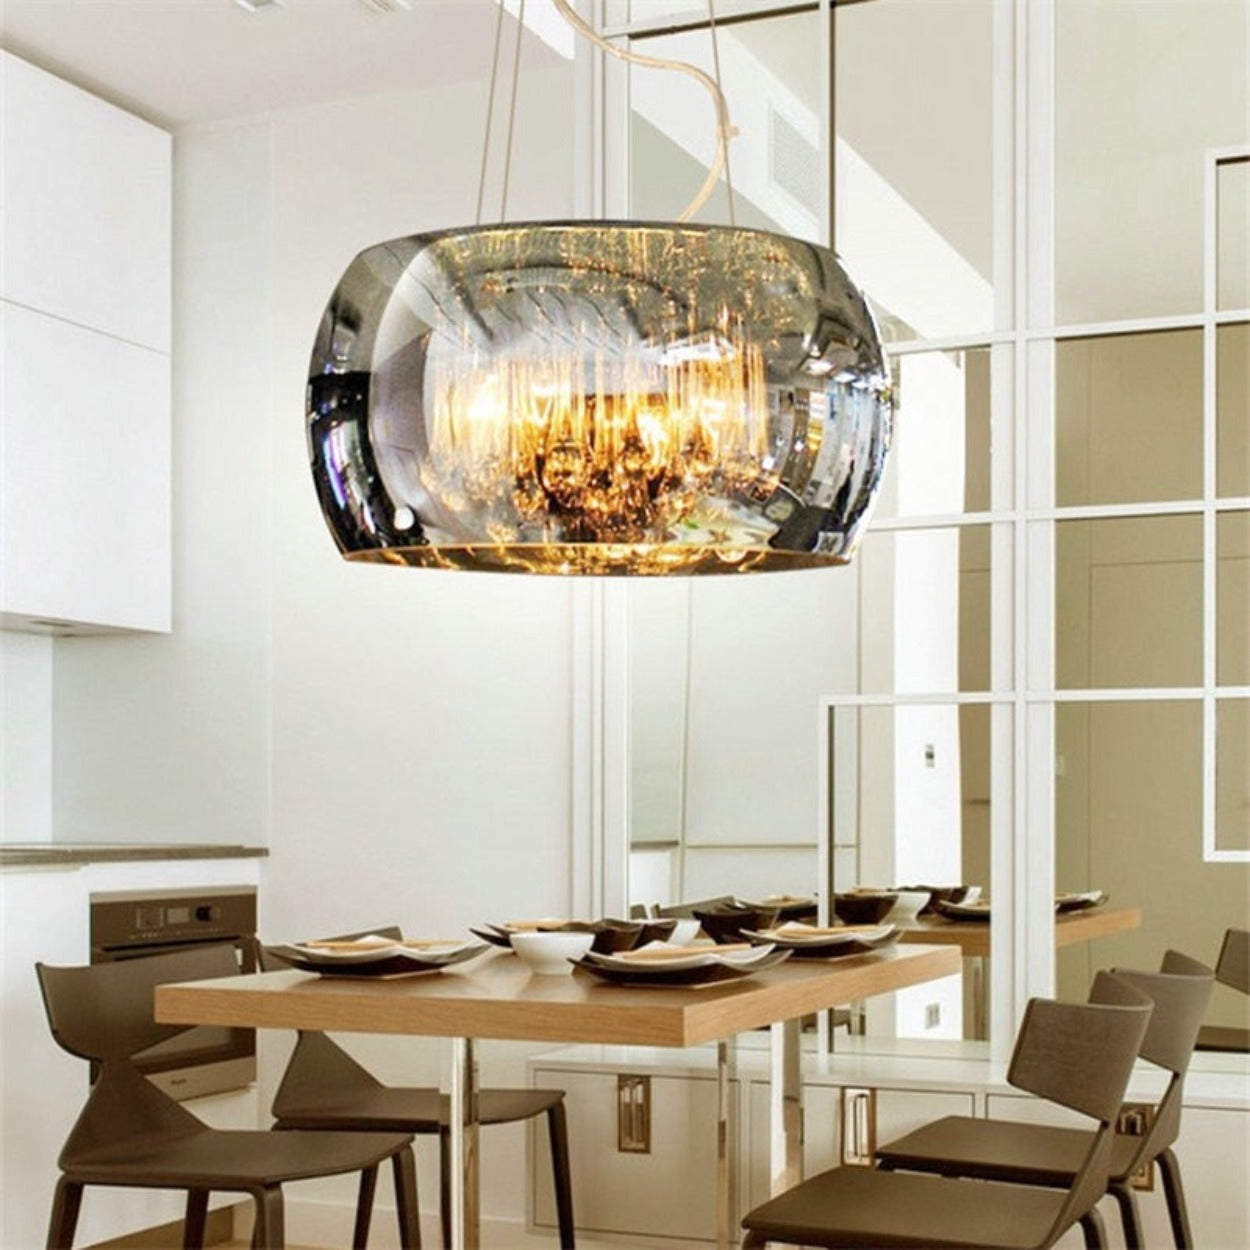 ANKUR DOMA PEARL GLASS DOME AND CRYSTAL LED HANGING CHANDELIER